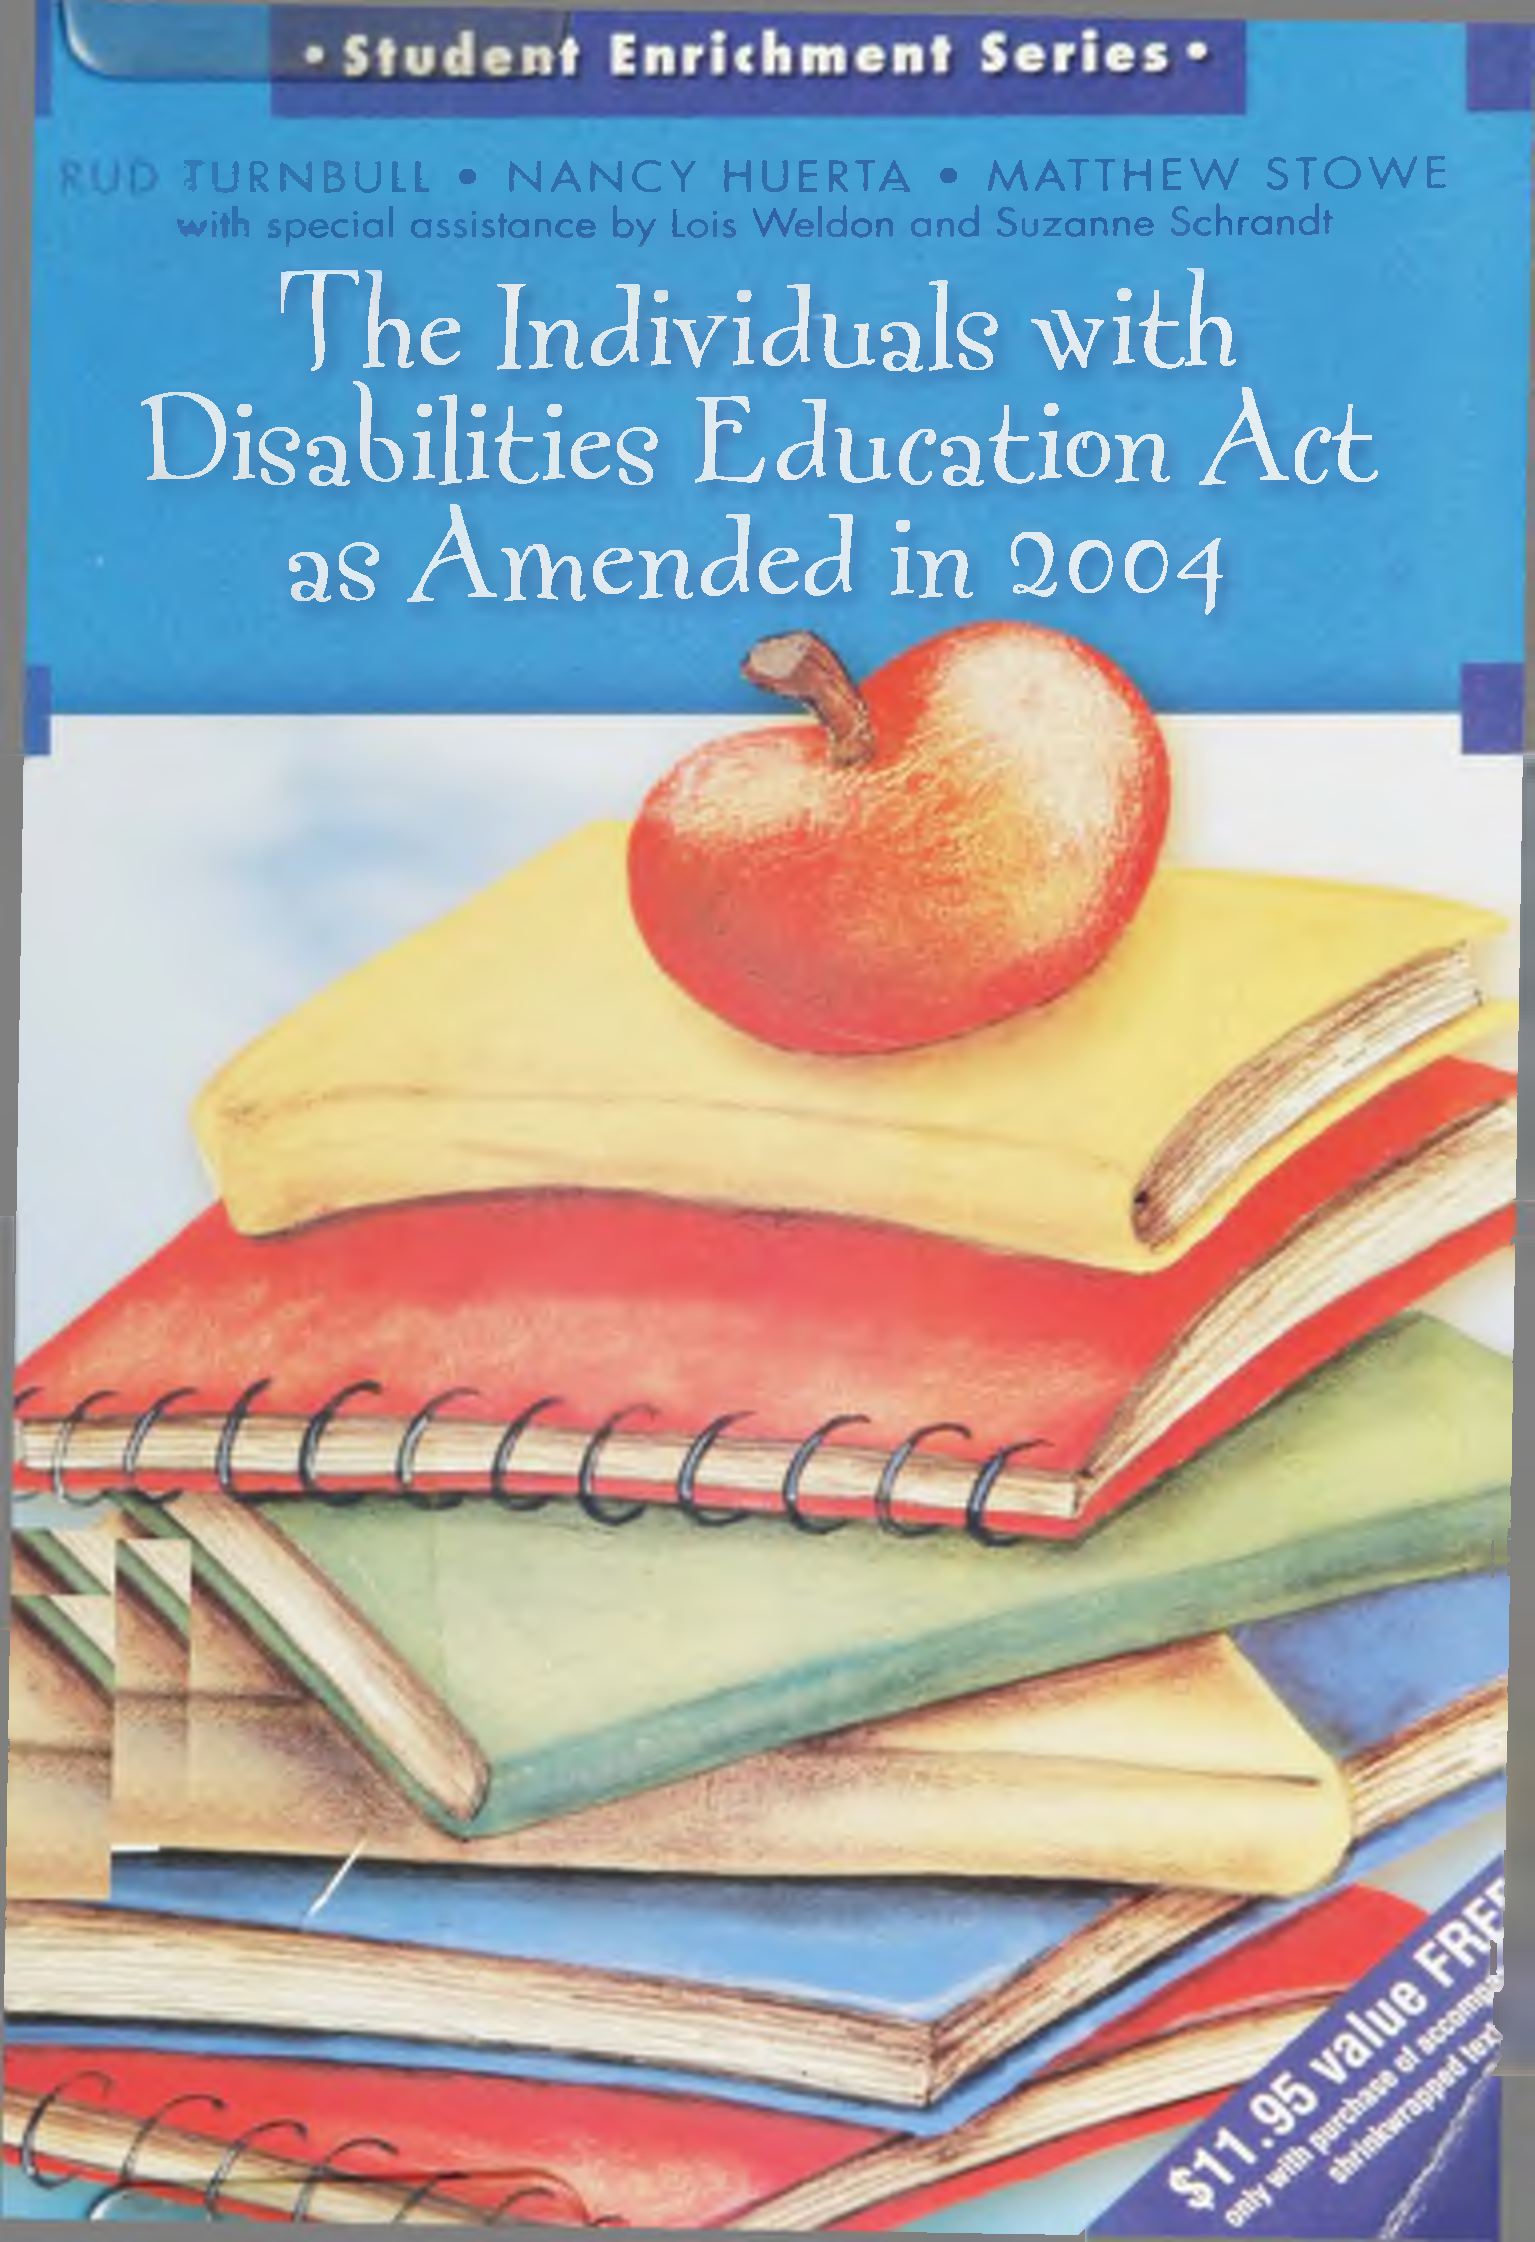 The individuals with disabilities Act as amended in 2004